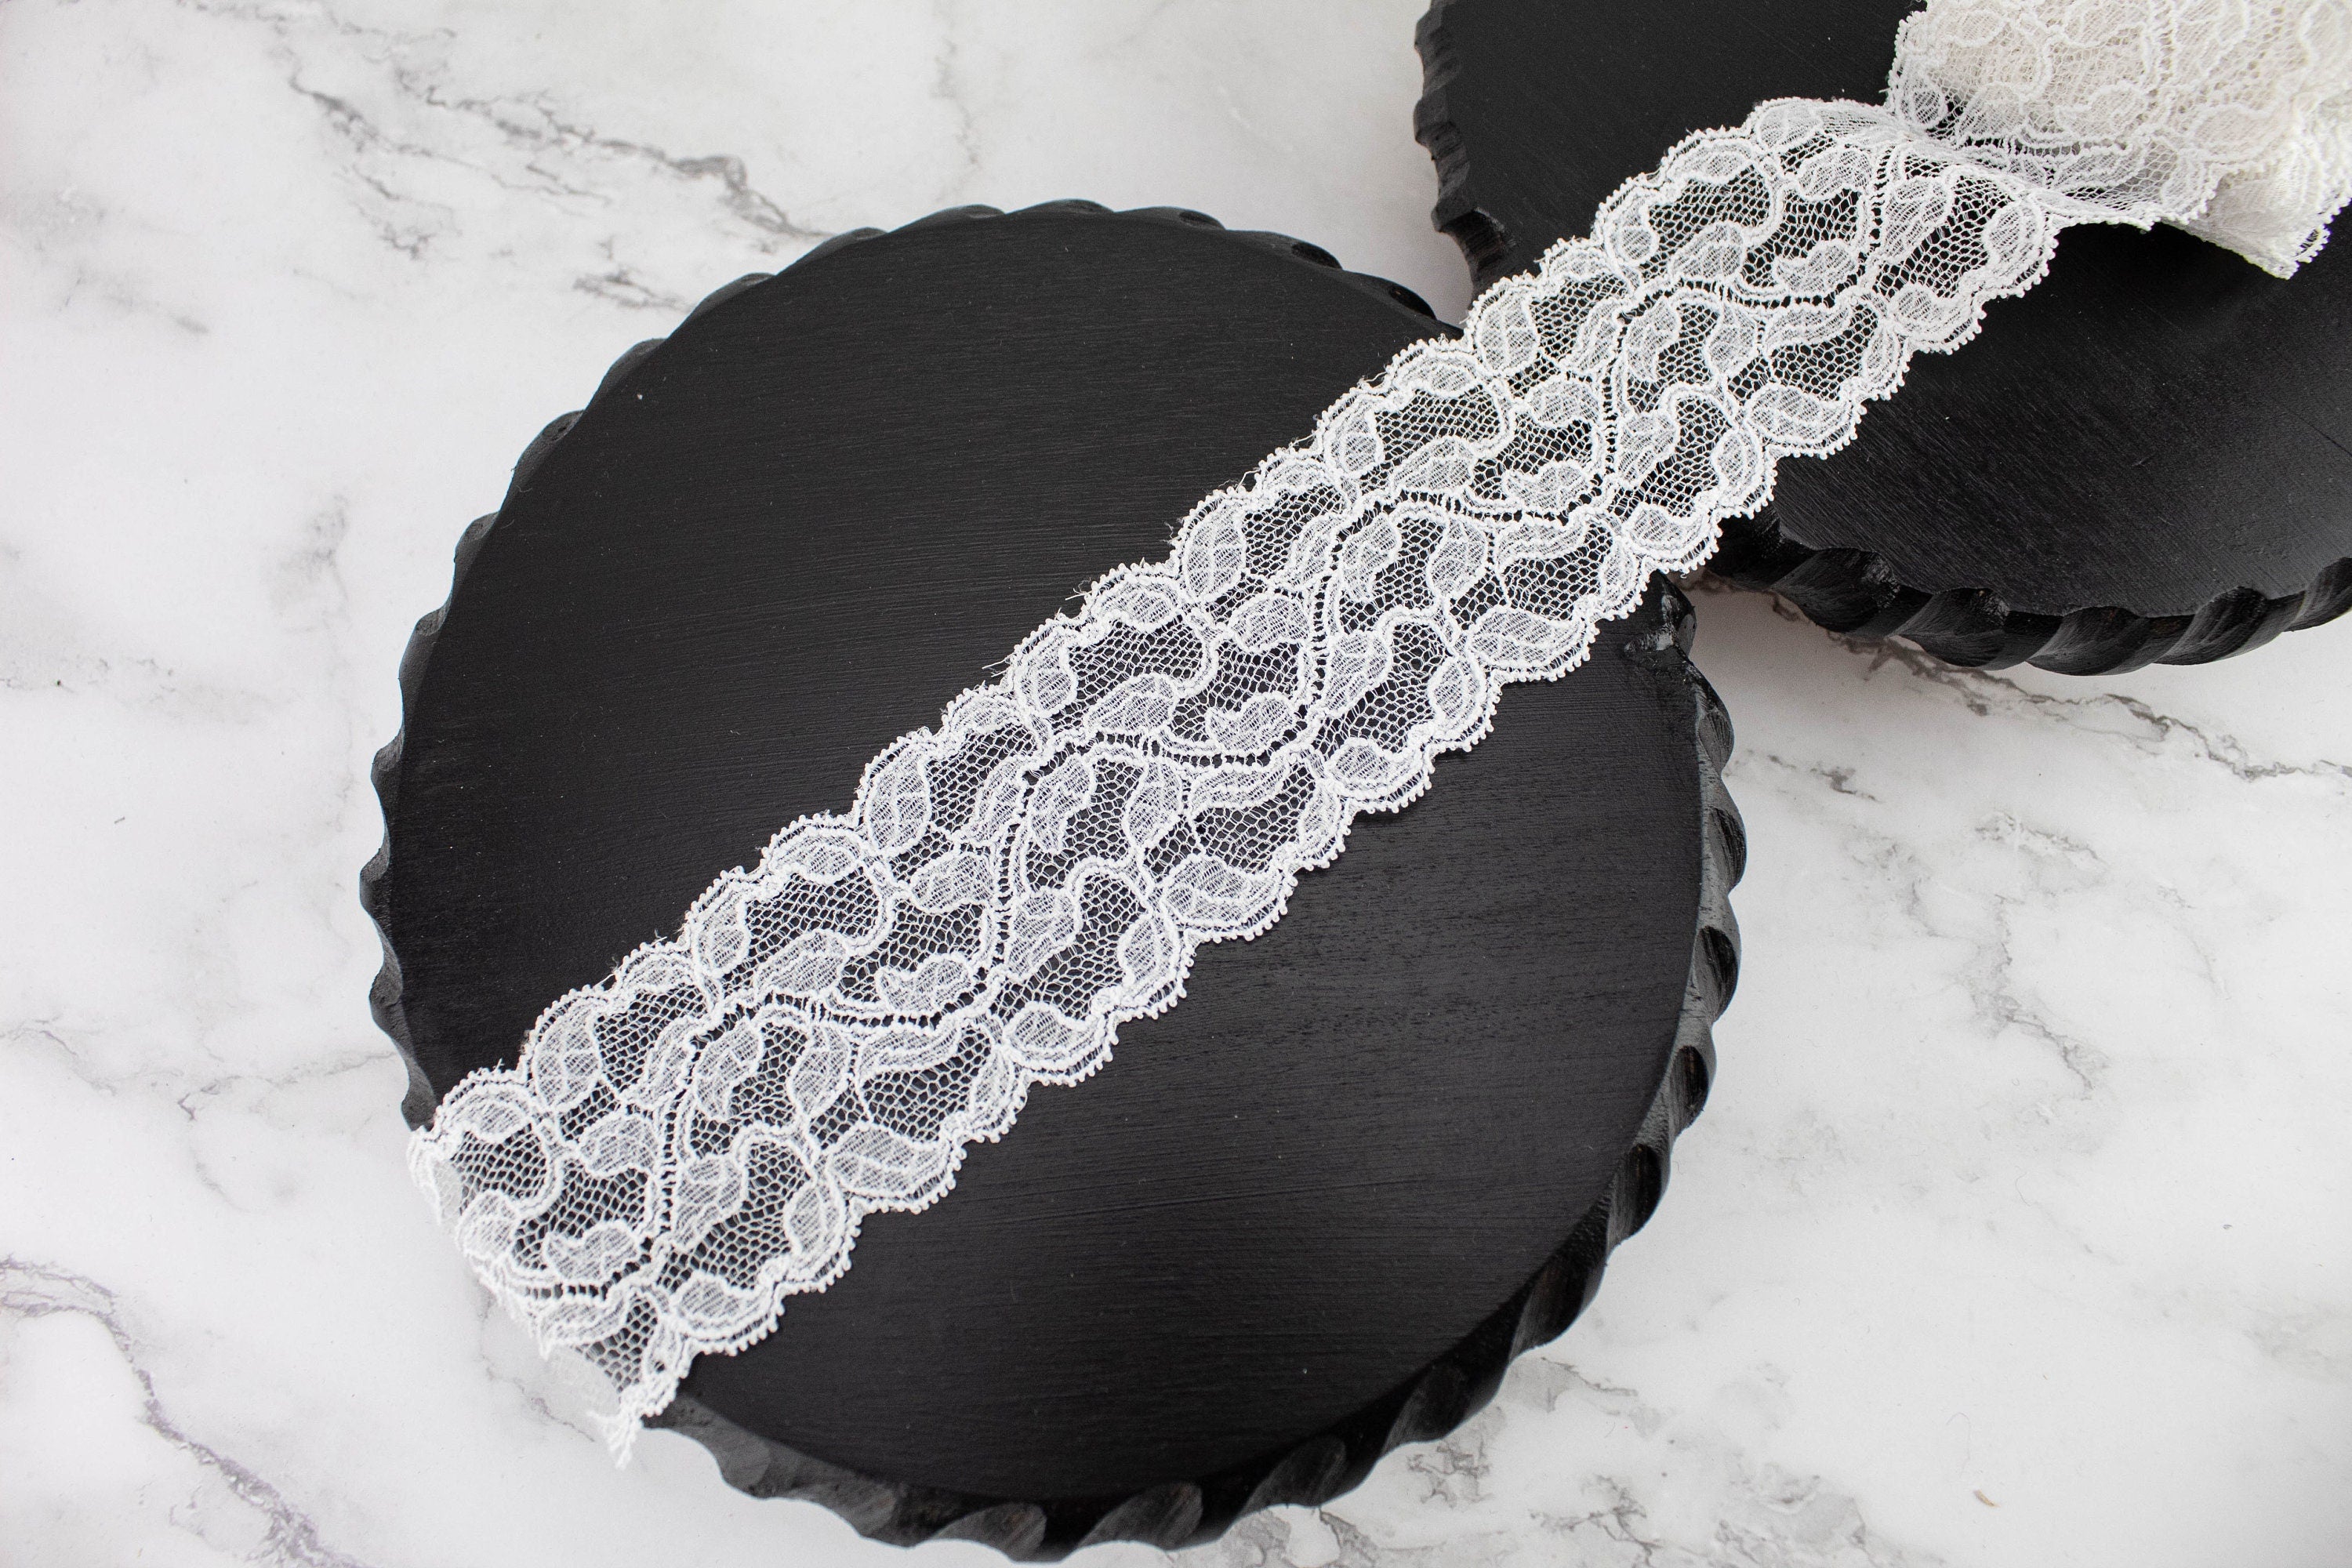 Lace, Stretch Lace, 9 Black with Silver Floral Stretch Lace, 9 inch